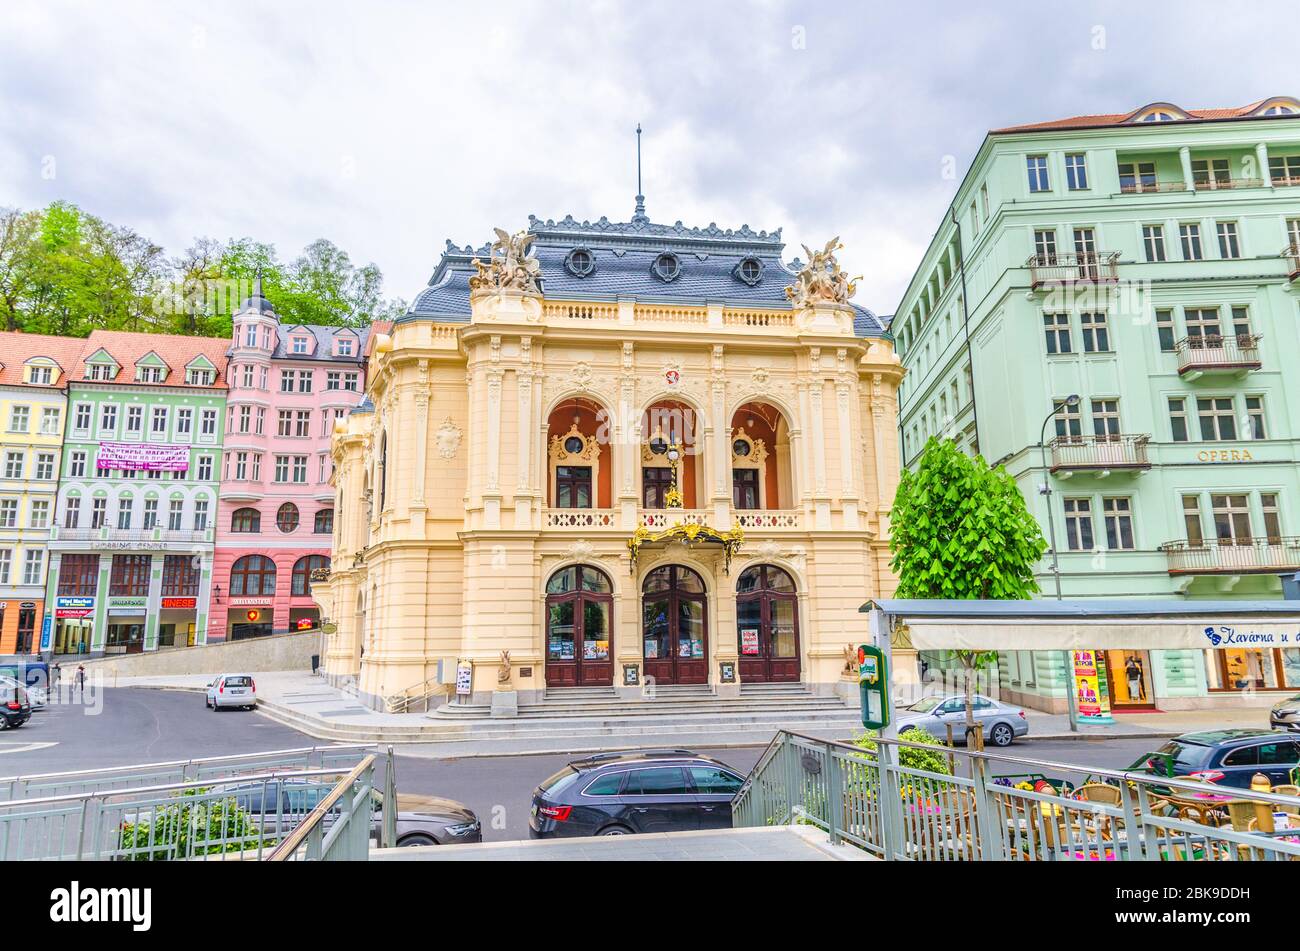 Karlovy Vary, Czech Republic, May 9, 2019: Municipal Theatre Neo-Baroque building at Theatre Square in Carlsbad historical city centre, Tepla river embankment, colorful buildings, West Bohemia Stock Photo